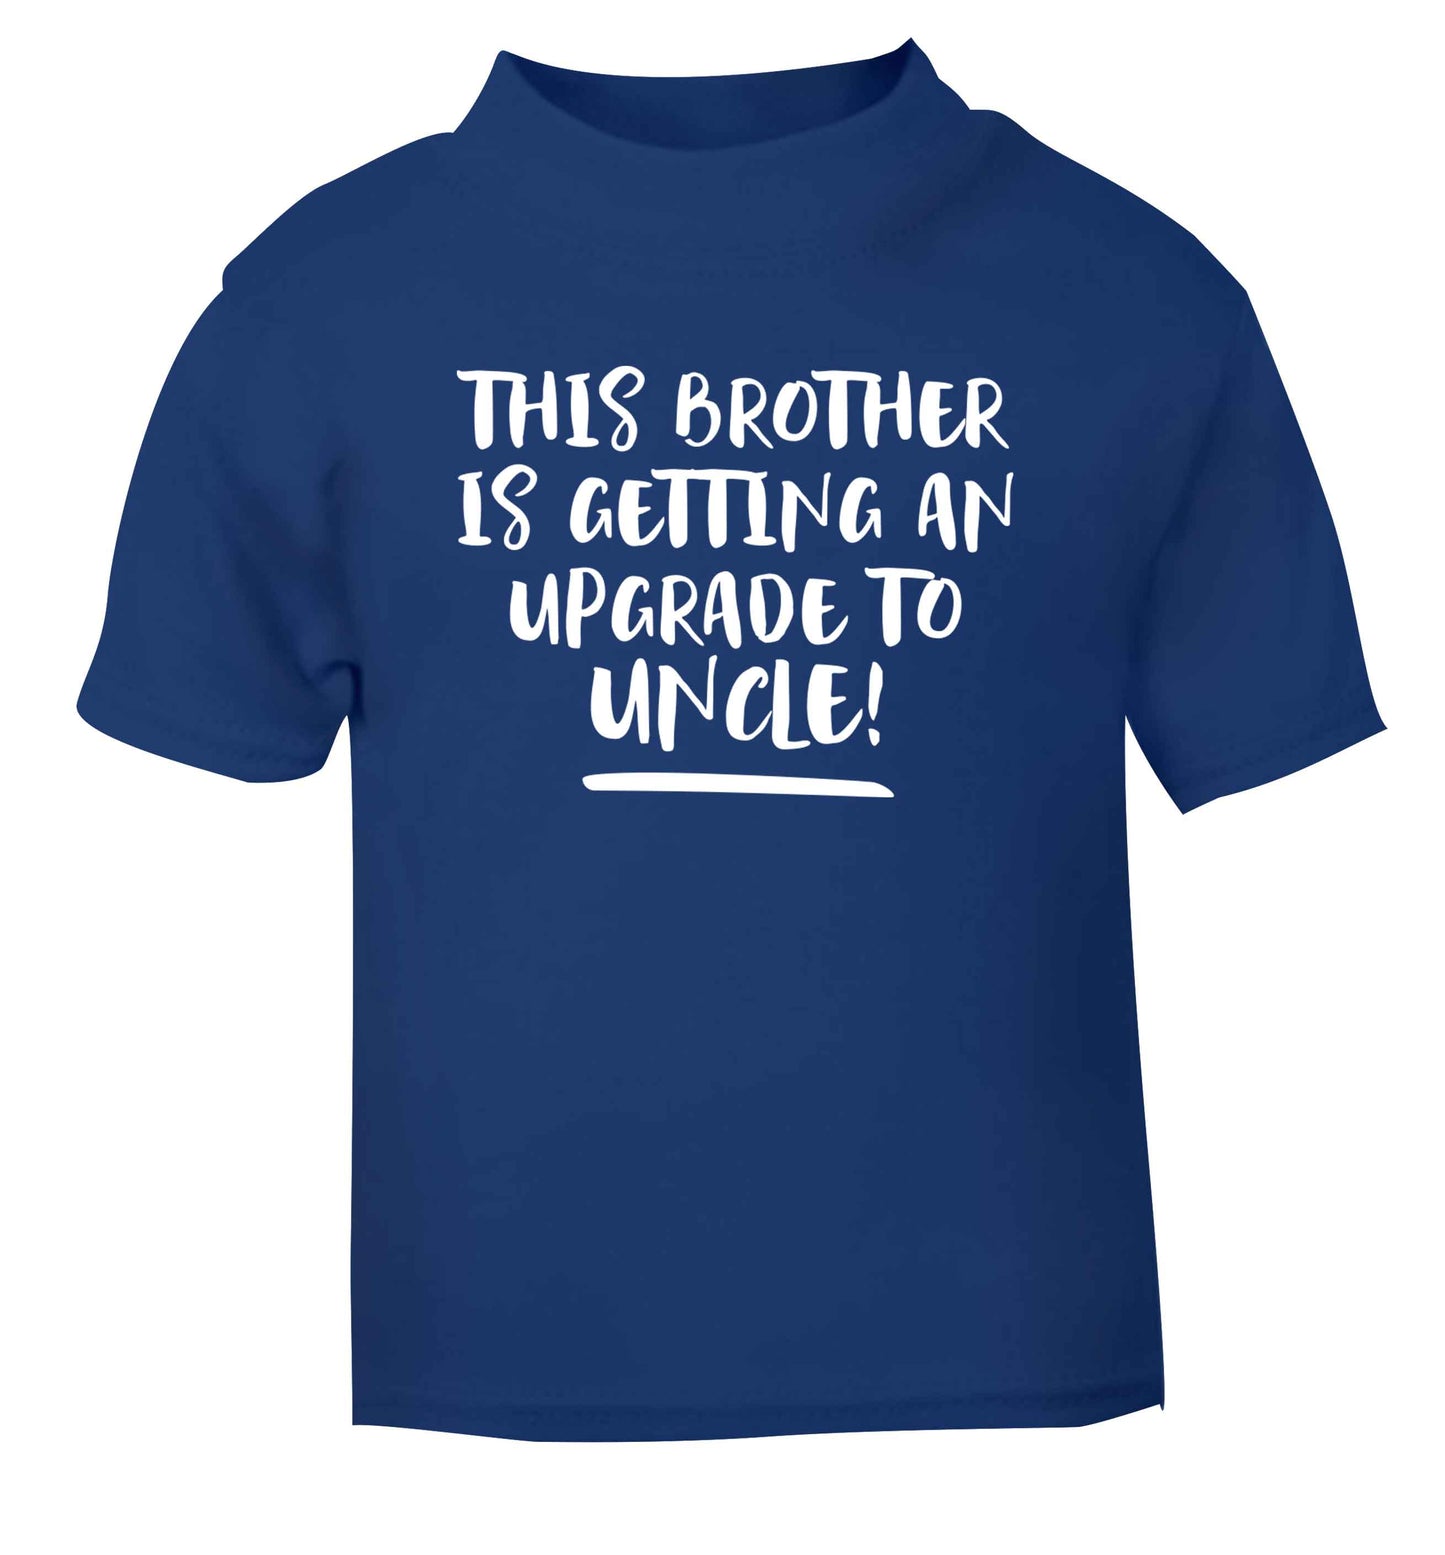 This brother is getting an upgrade to uncle! blue Baby Toddler Tshirt 2 Years